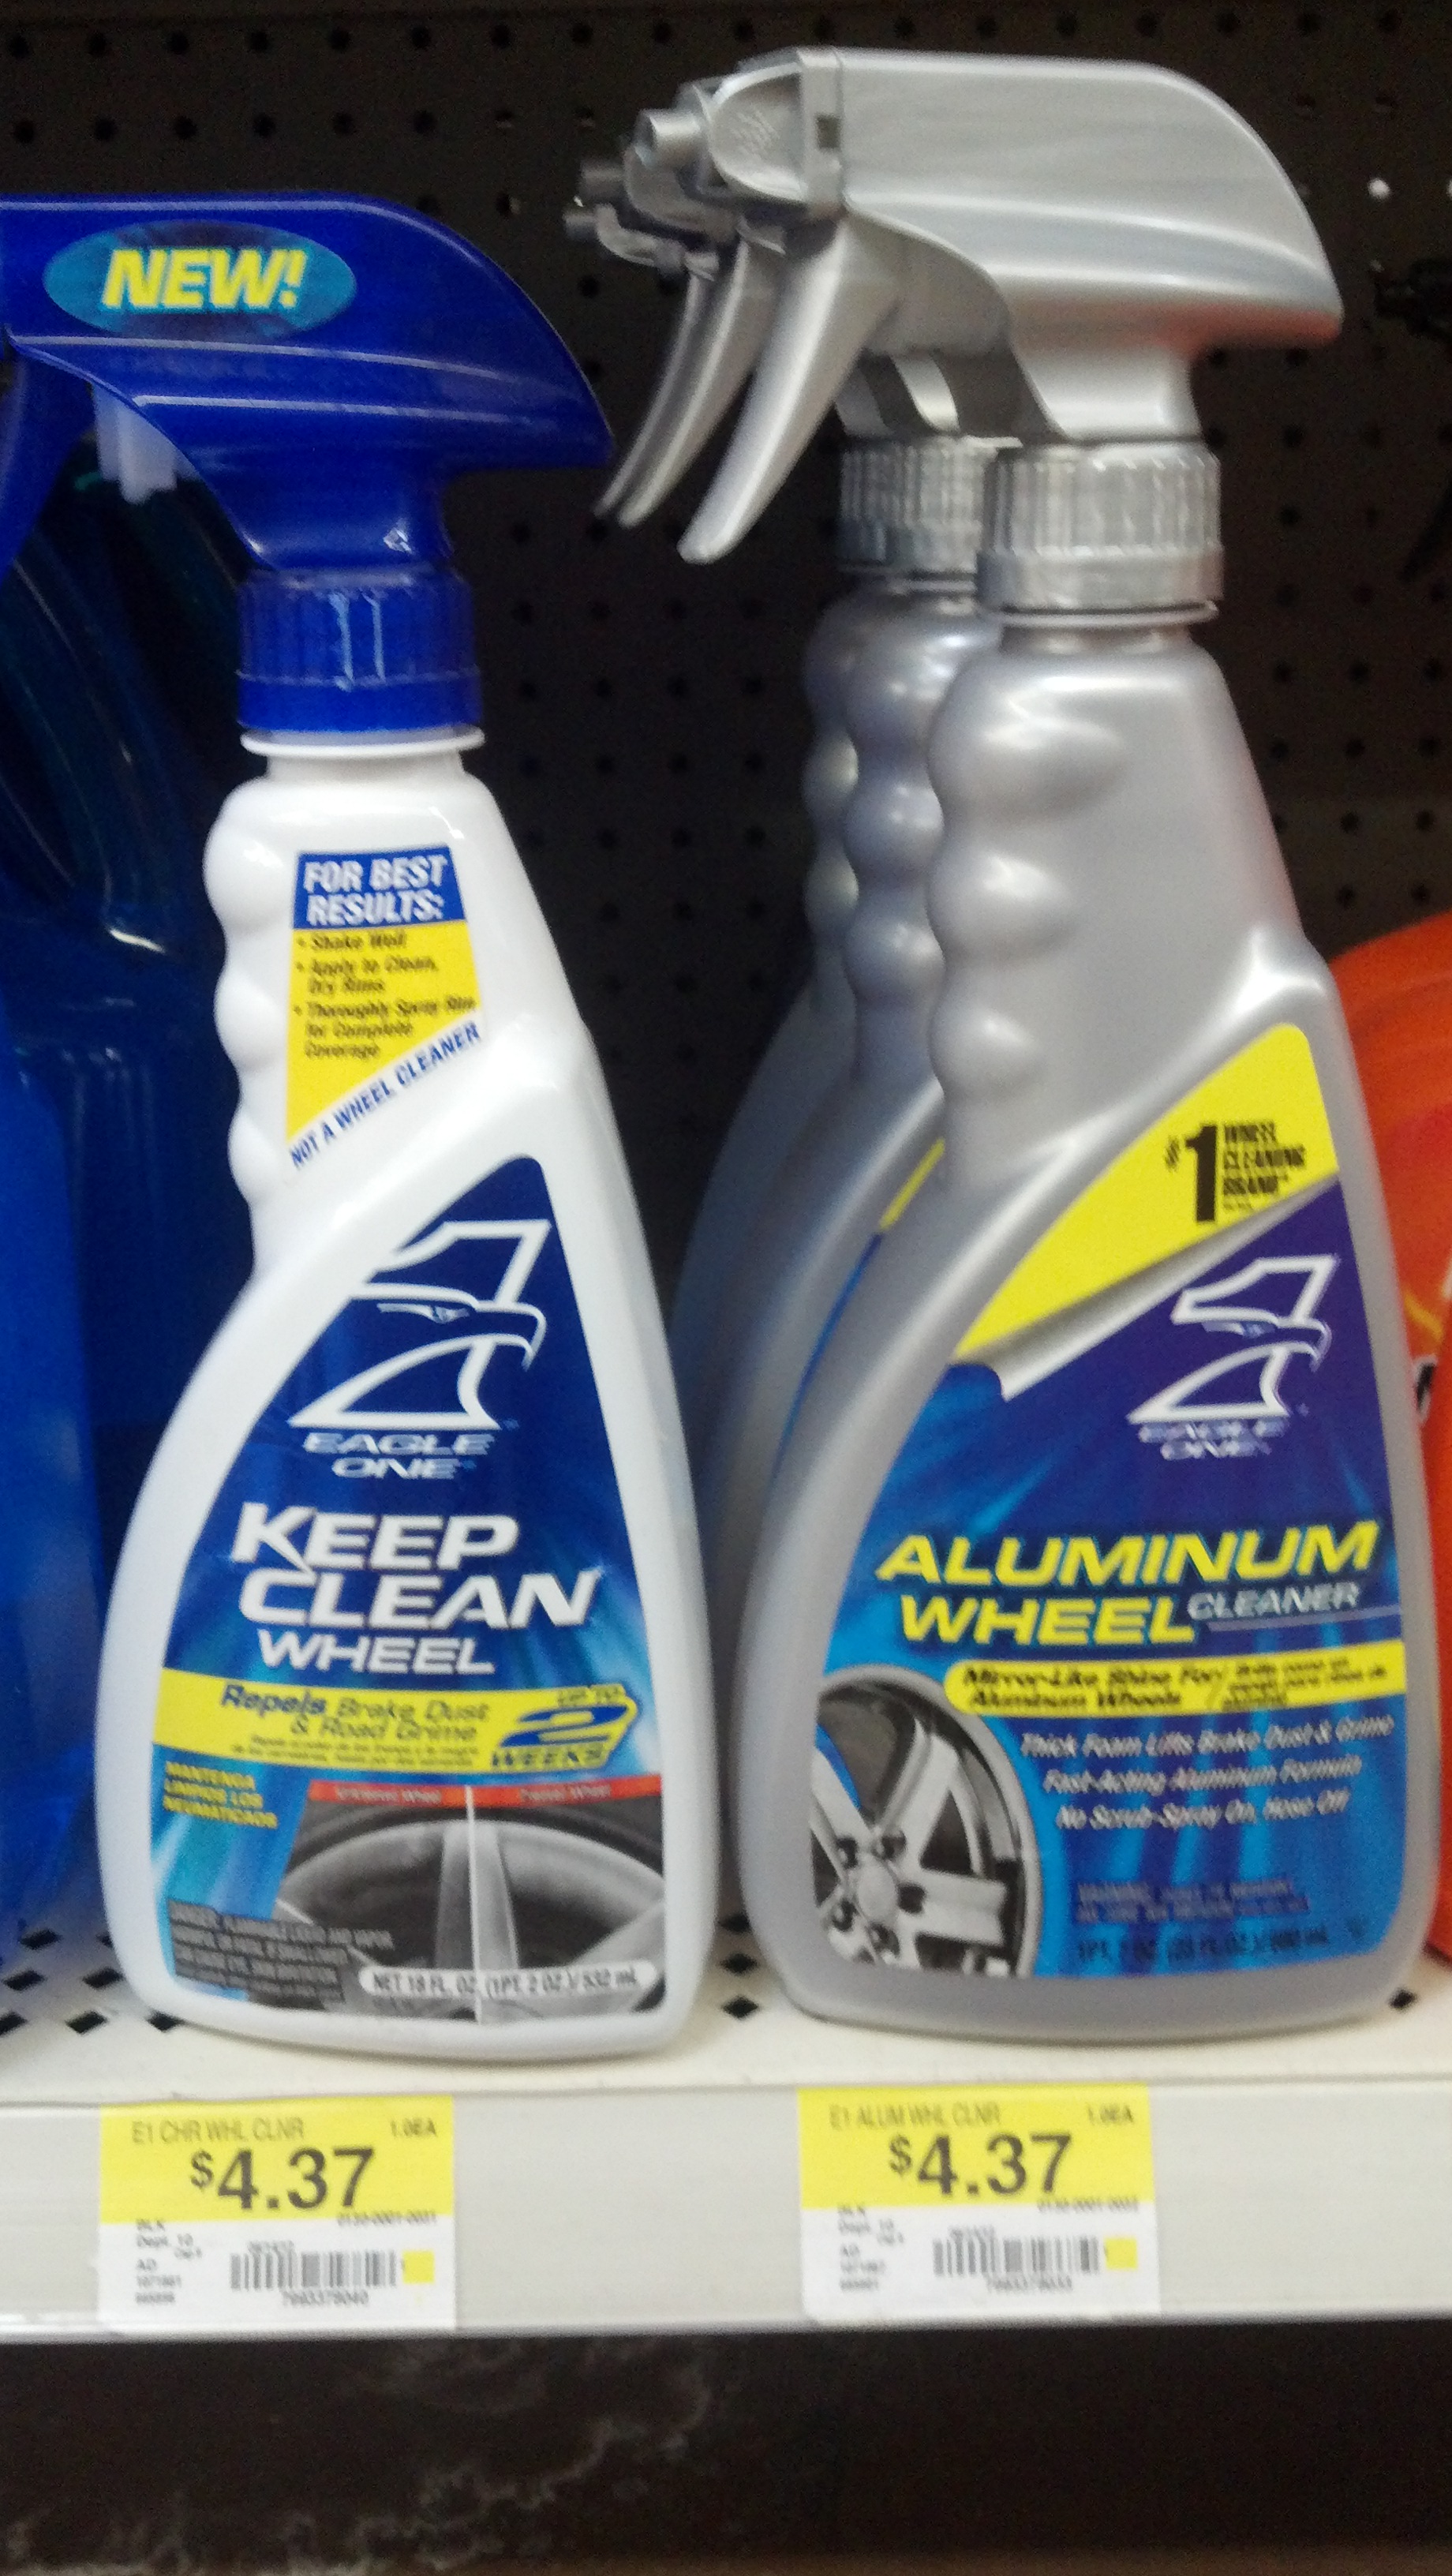 New $1 off Eagle One Wheel Cleaner Coupon w/ Walmart Match Up